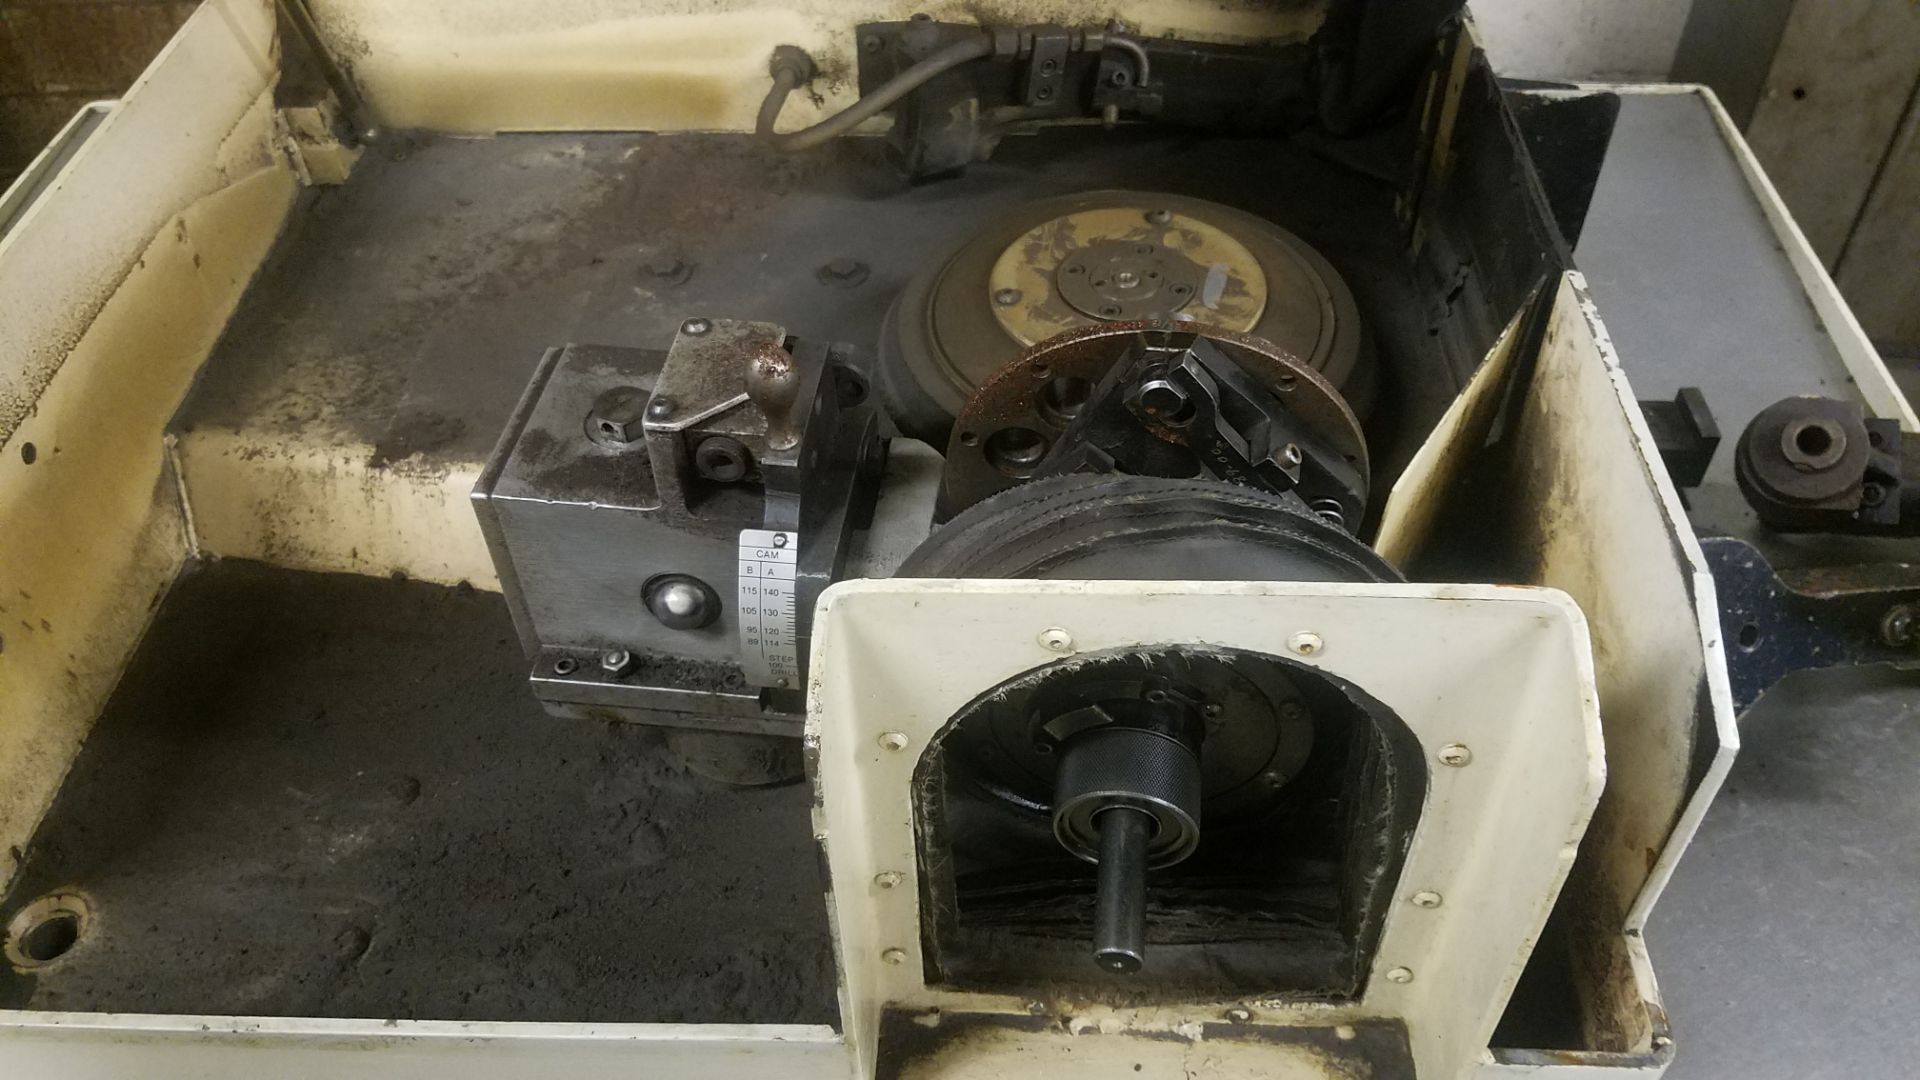 Winslow Model HR 947 Drill Point Grinder, s/n 947-00295-89, Loading Fee $50, Located at 325 E. - Image 11 of 11